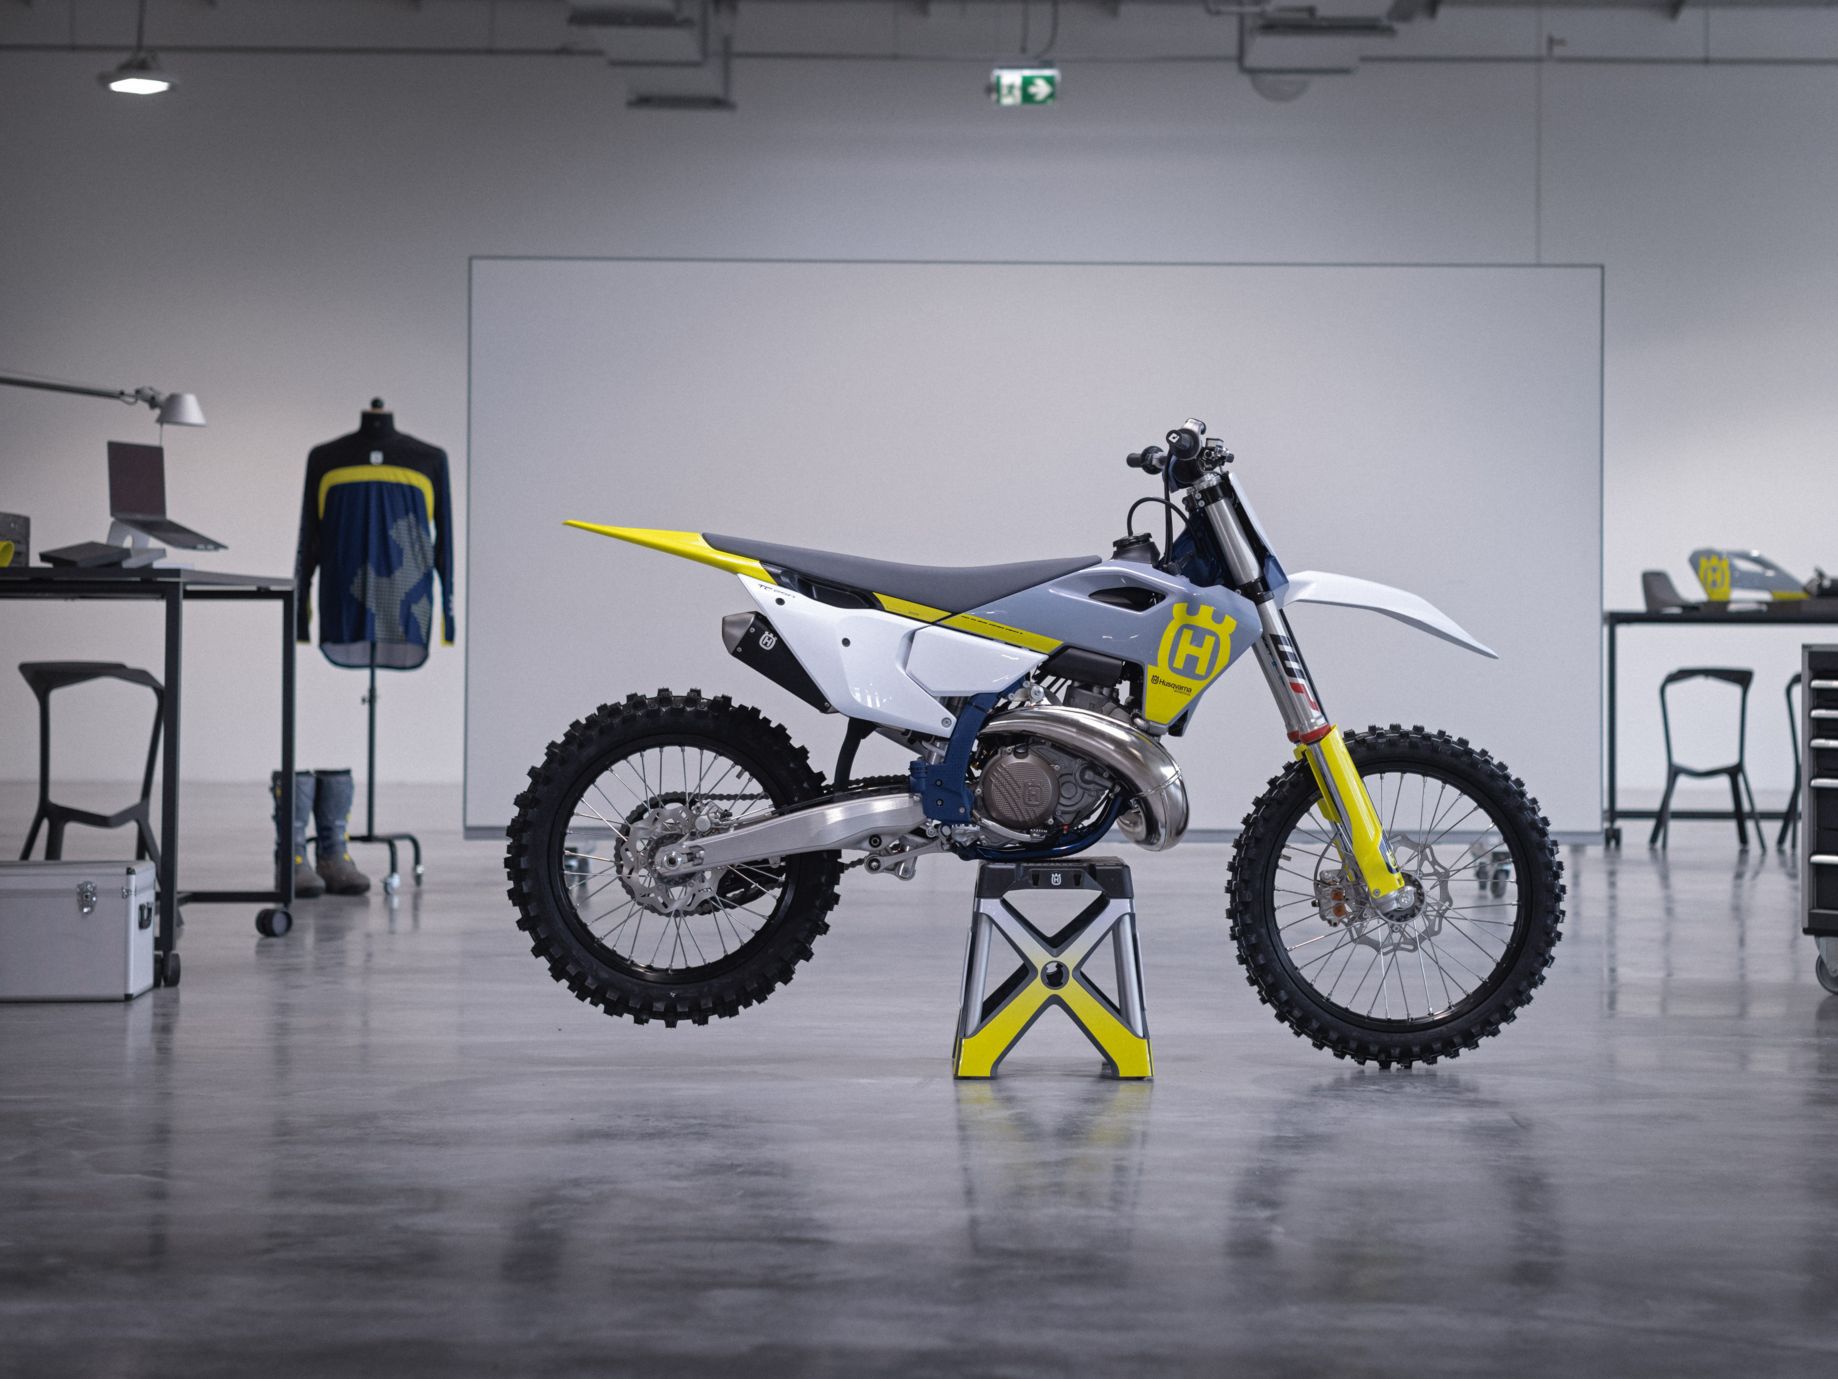 701 For Sale - Husqvarna Motorcycles - Cycle Trader